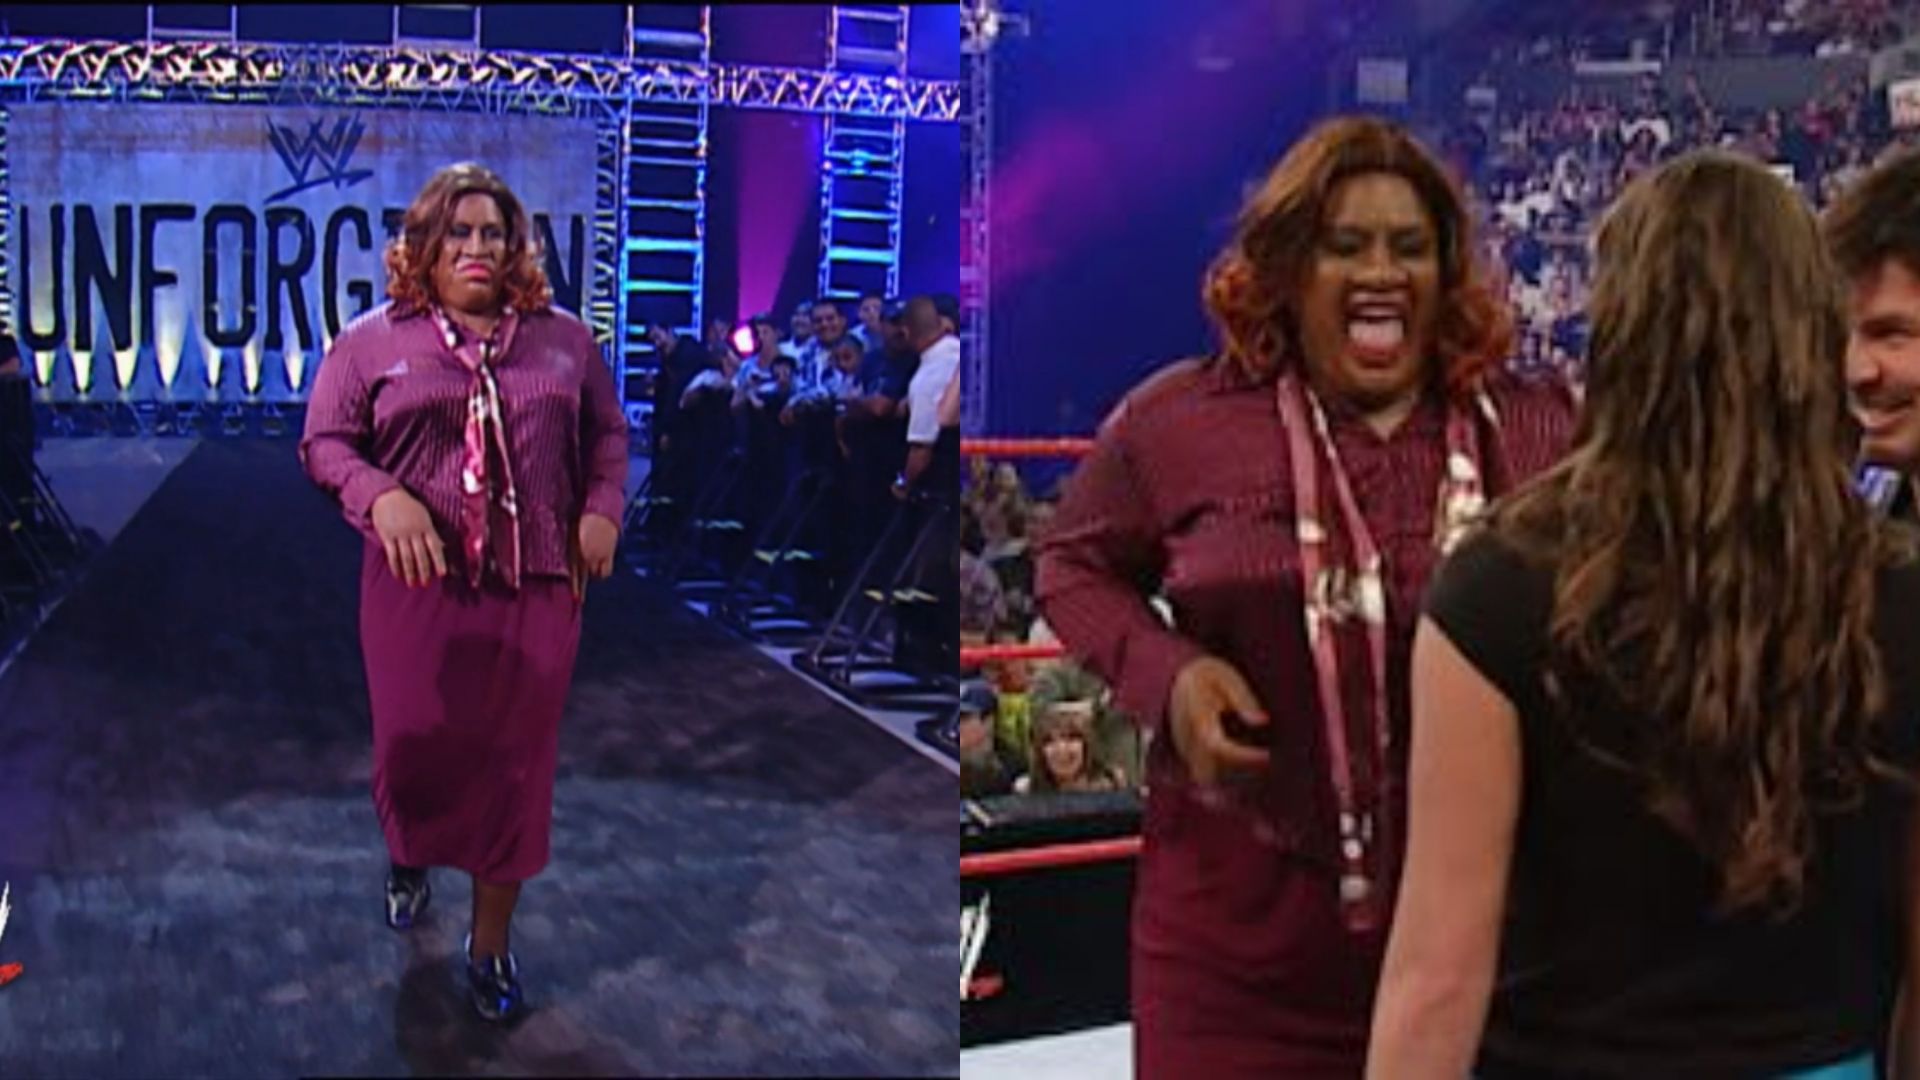 WWE Hall of Famer Rikishi, in disguise, kissed Stephanie McMahon